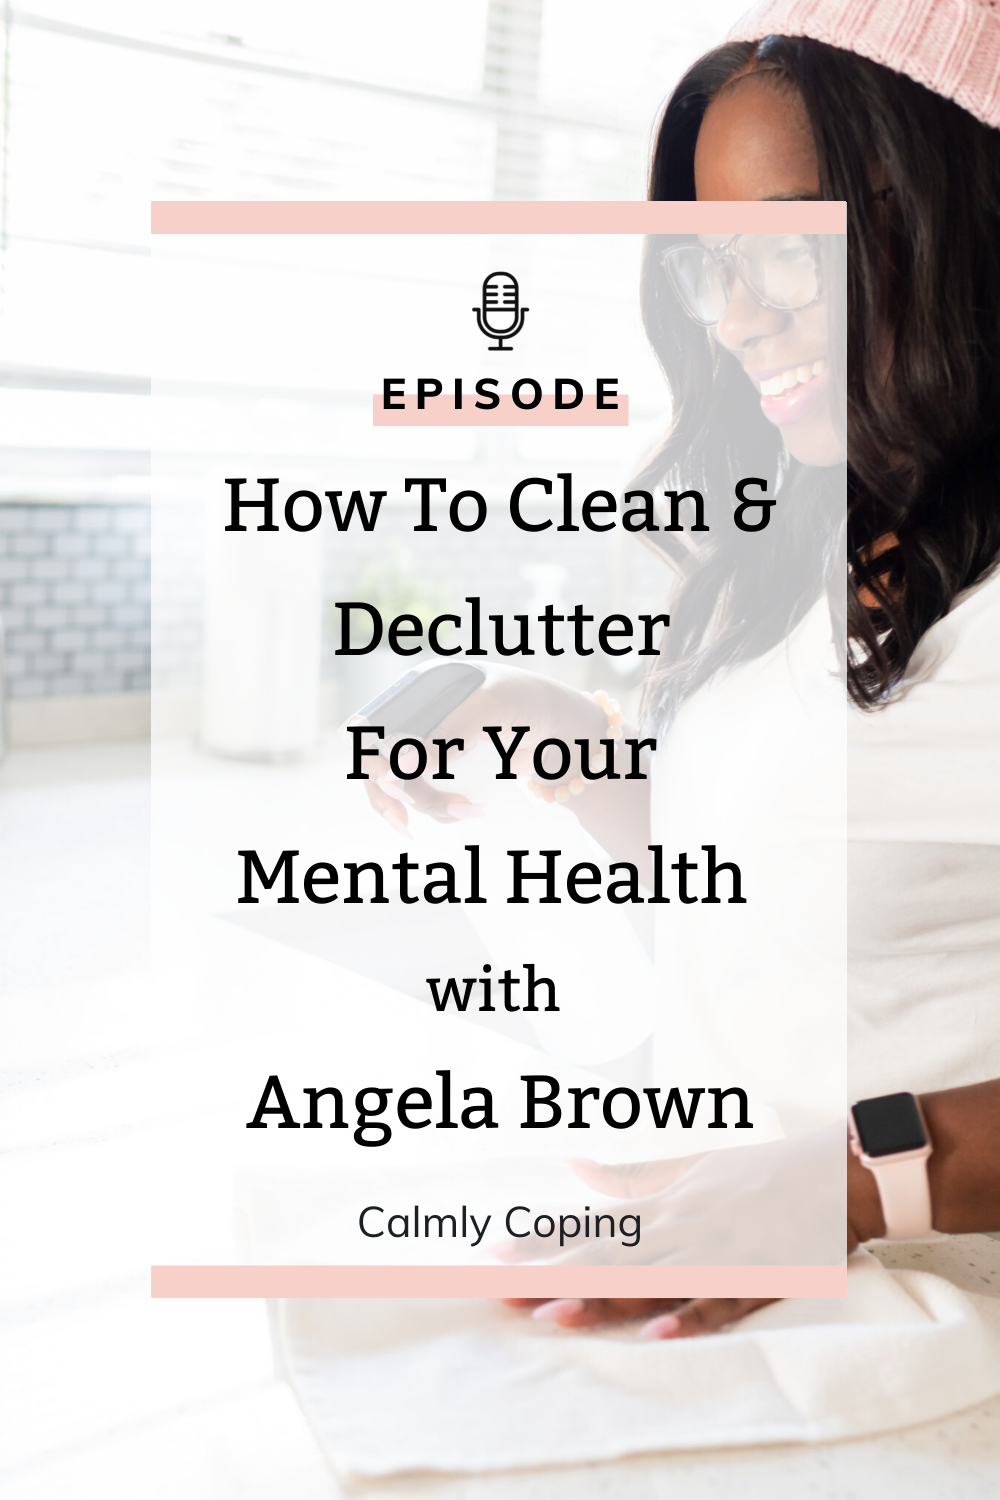 How To Clean & Declutter For Your Mental Health with Angela Brown